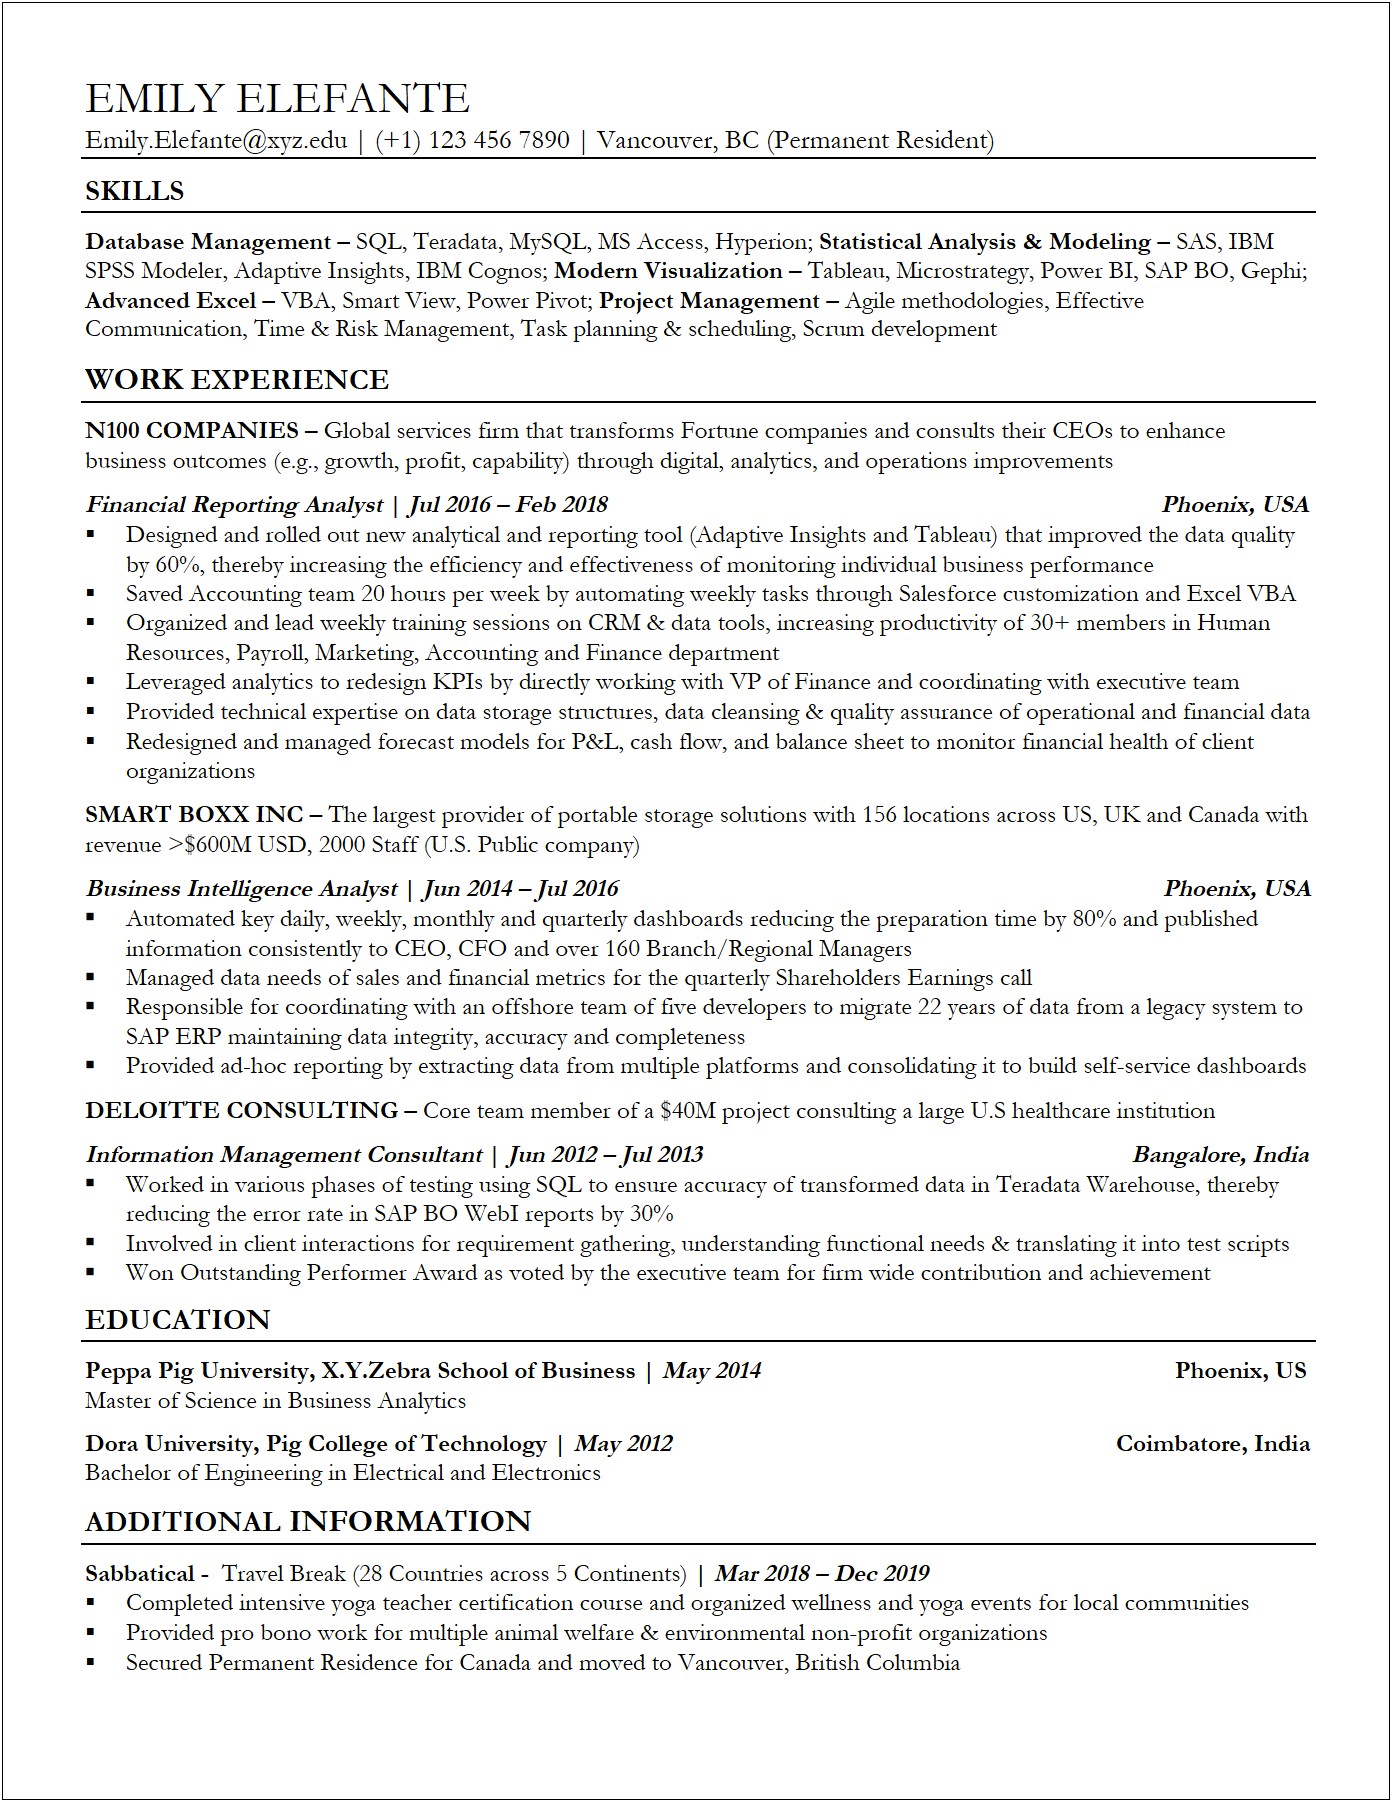 Should I Exclude Student Jobs On Resume